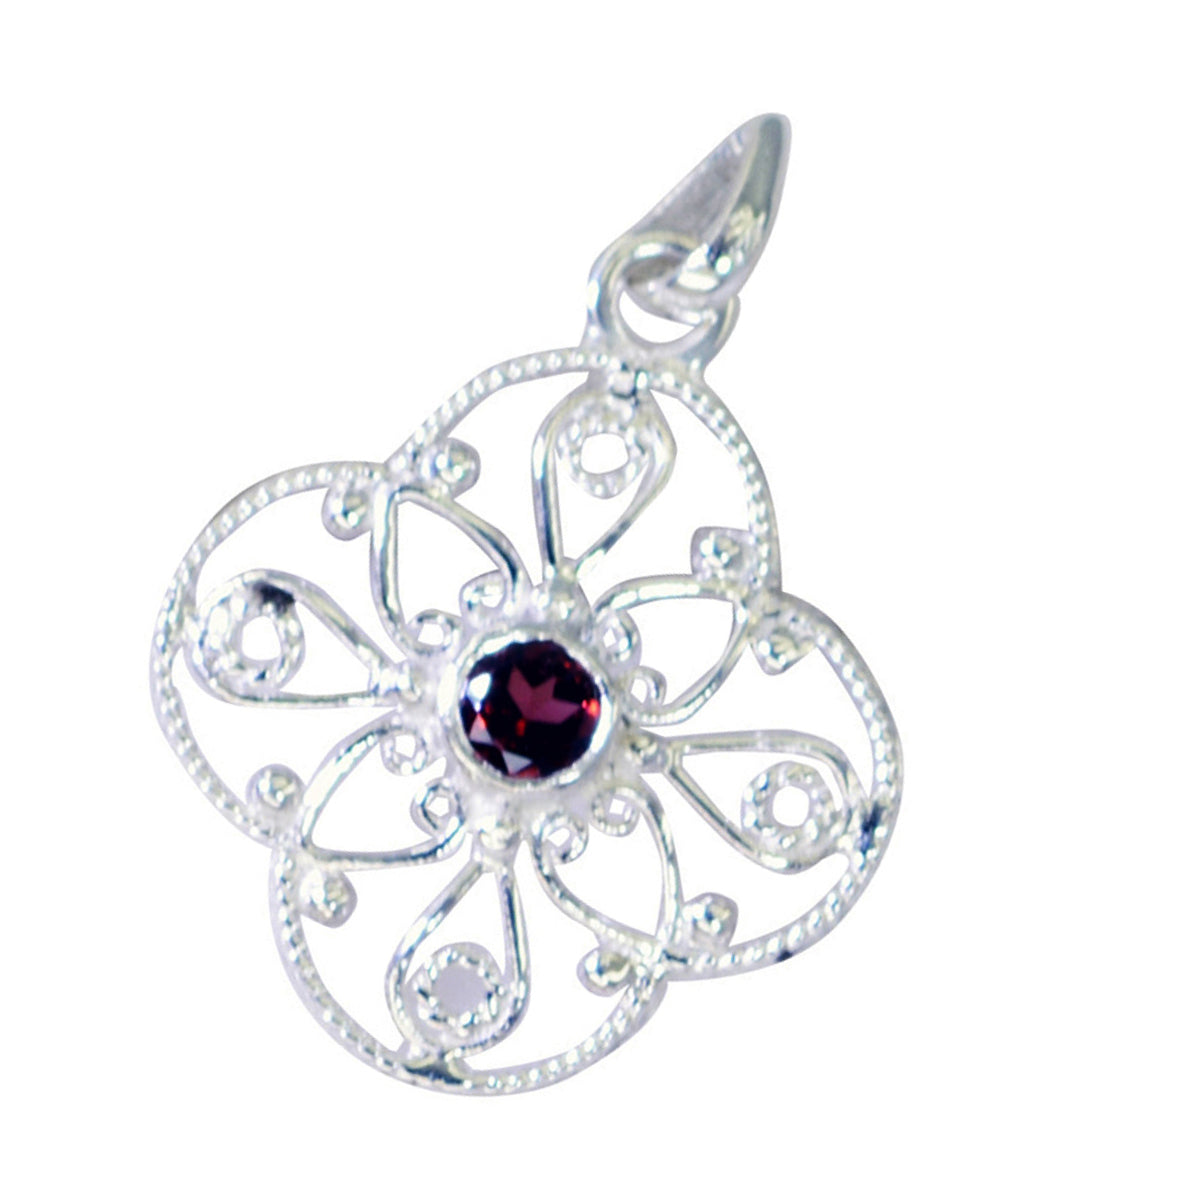 Riyo Appealing Gems Round Faceted Red Garnet Silver Pendant Gift For Boxing Day